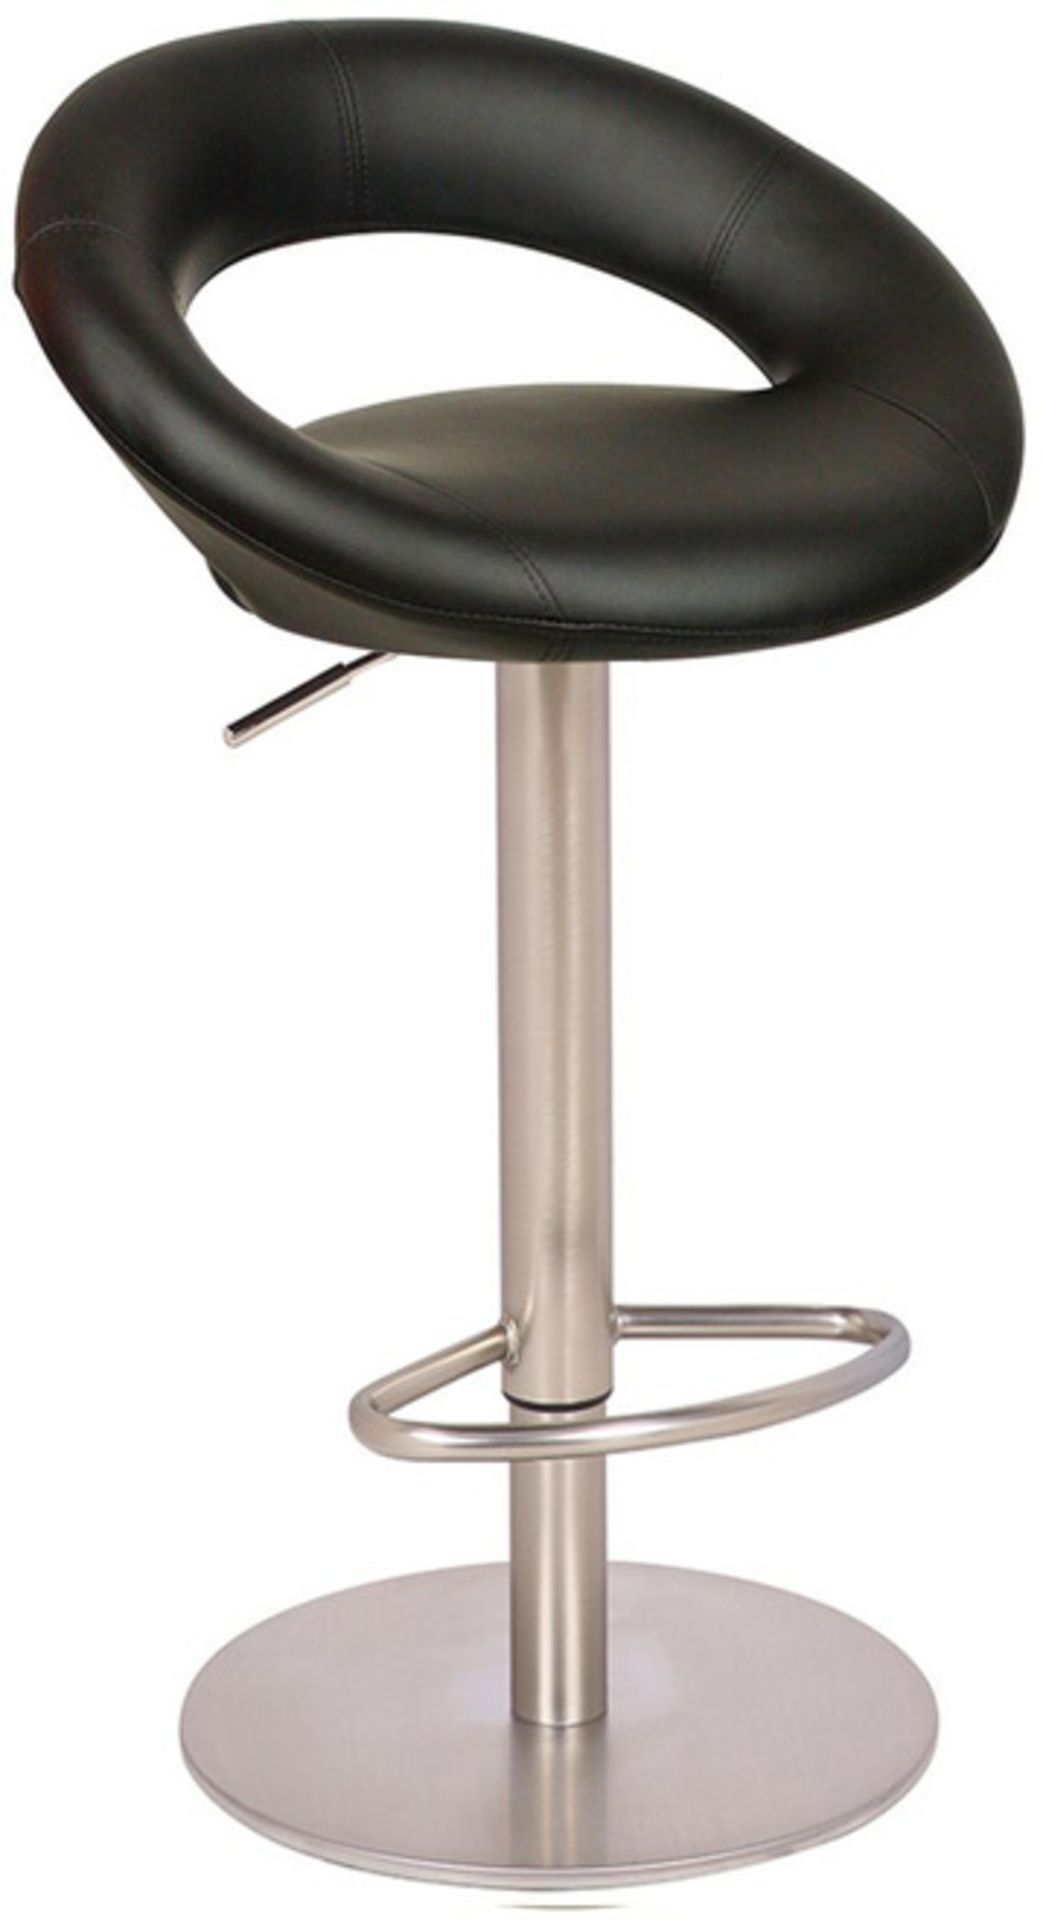 2 X NEW BOXED Deluxe Sorrento Bar Stool Charcoal Black (ROW13 TOP)